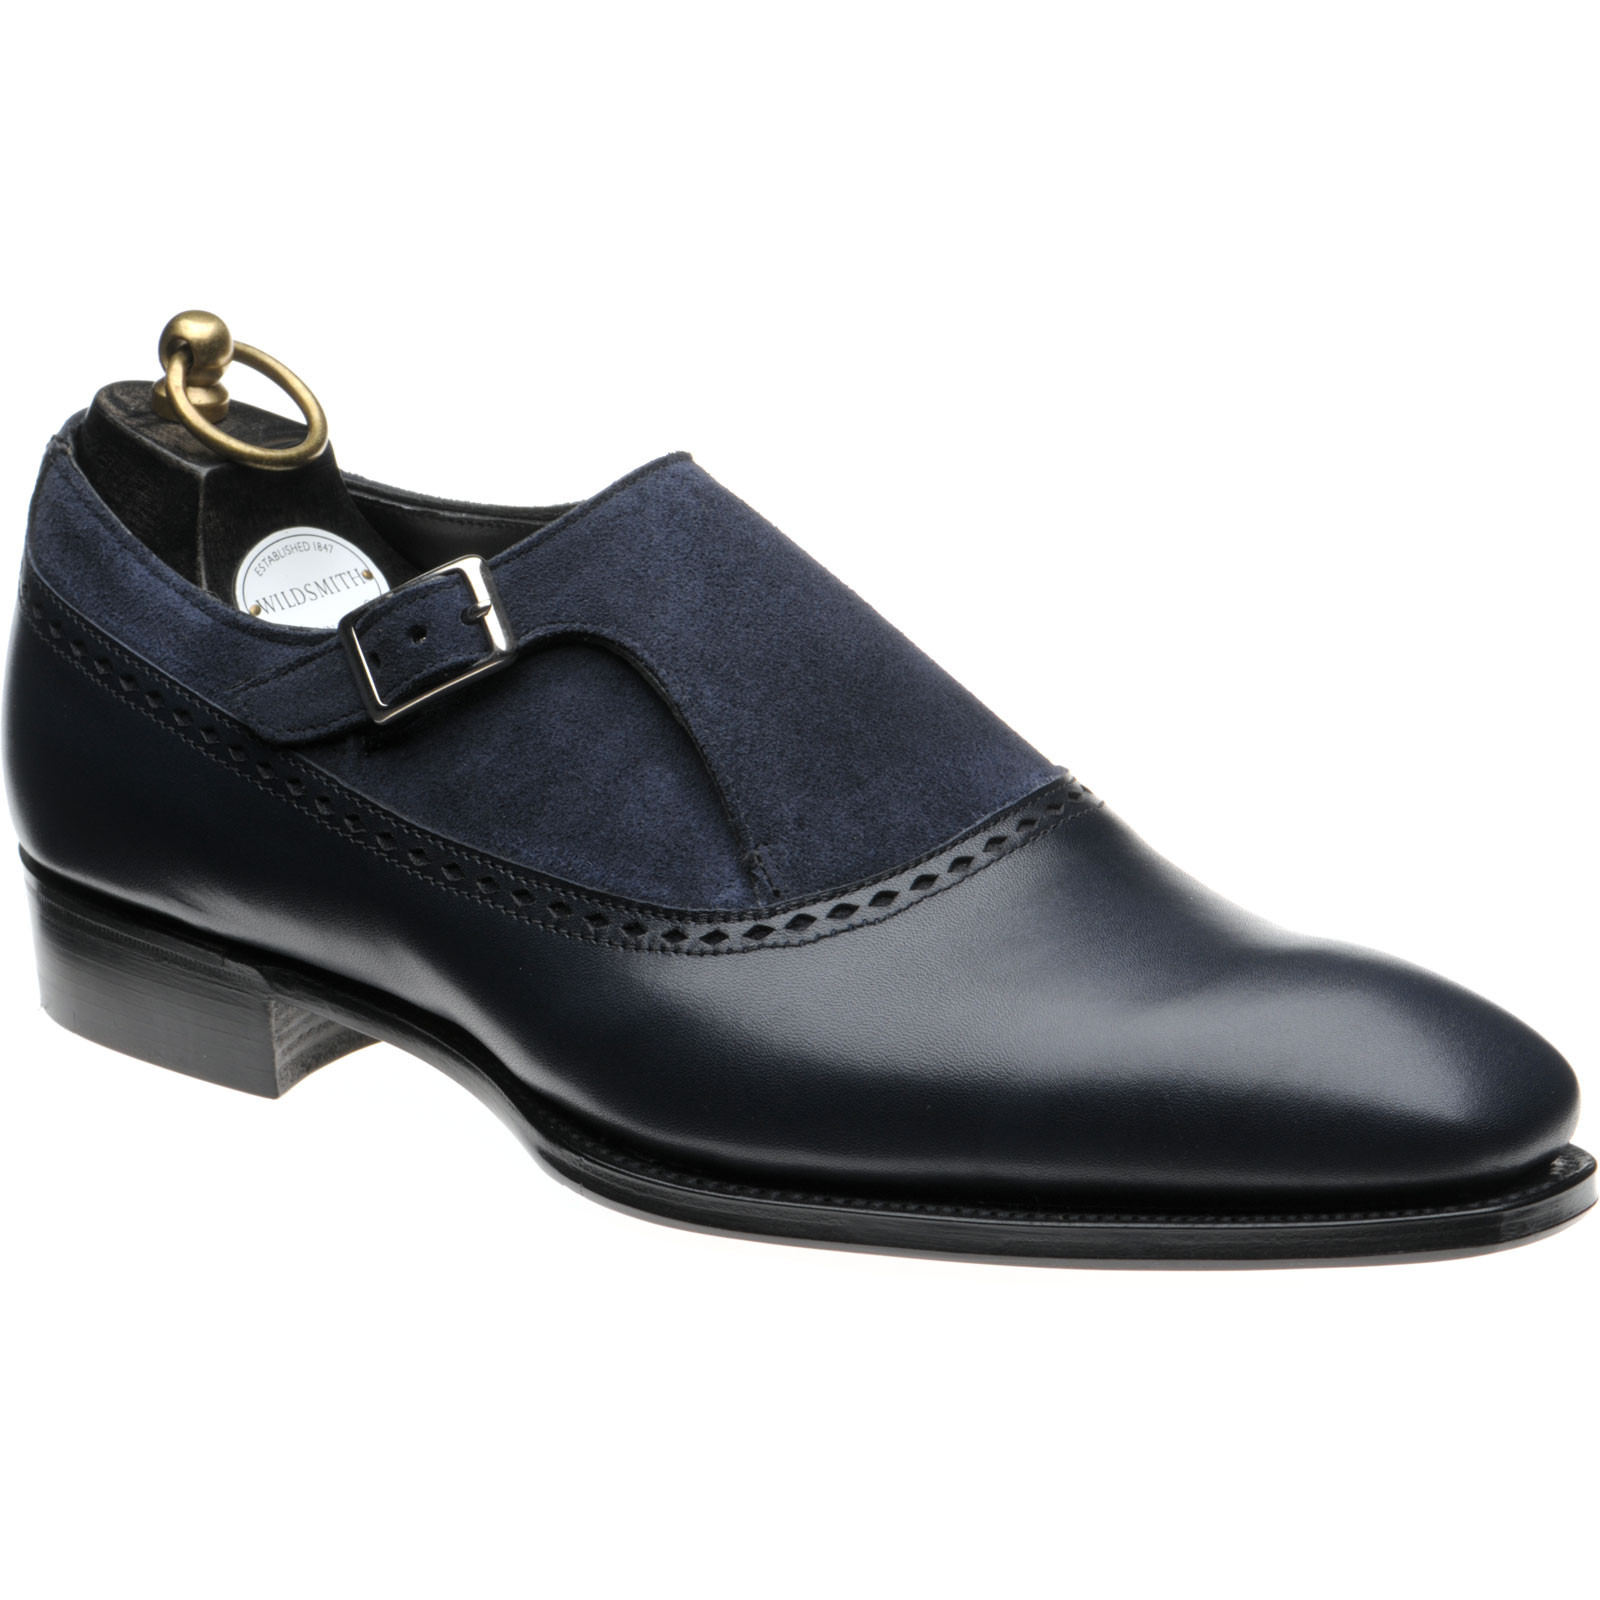 Wildsmith shoes | Wildsmith Shoes | Grosvenor in Navy Calf and Suede at ...